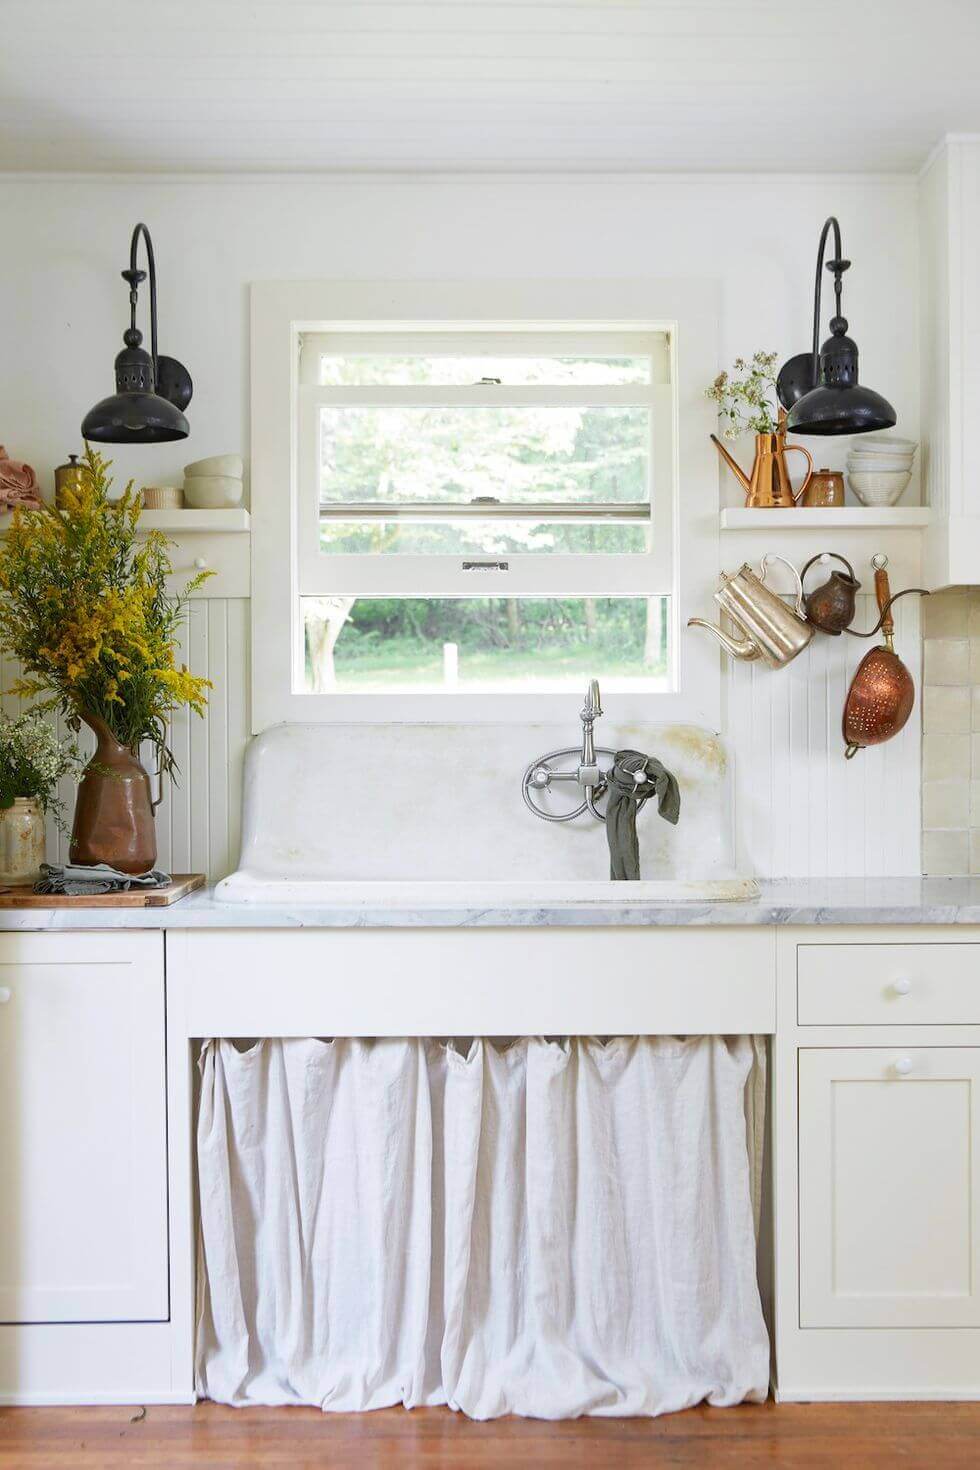 Small Kitchen Storage Ideas ikea Hang a Curtain to Hide Things